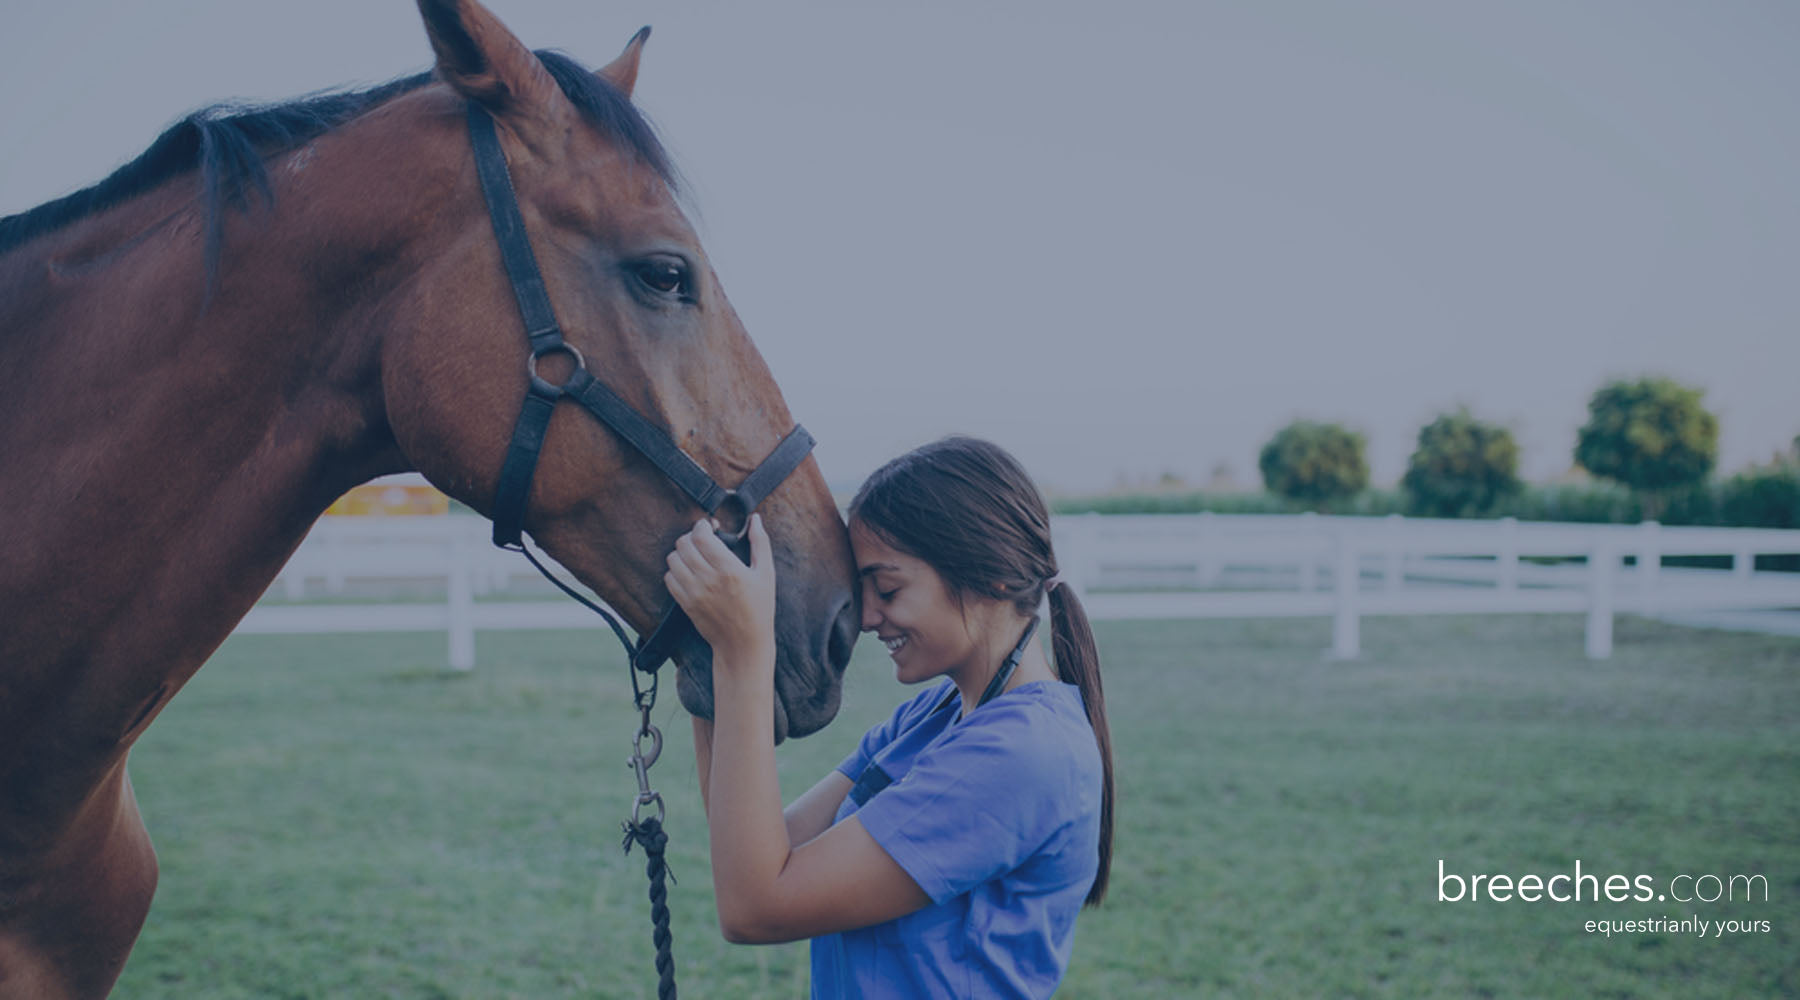 How riders can protect themselves from COVID-19 and support horse immune system